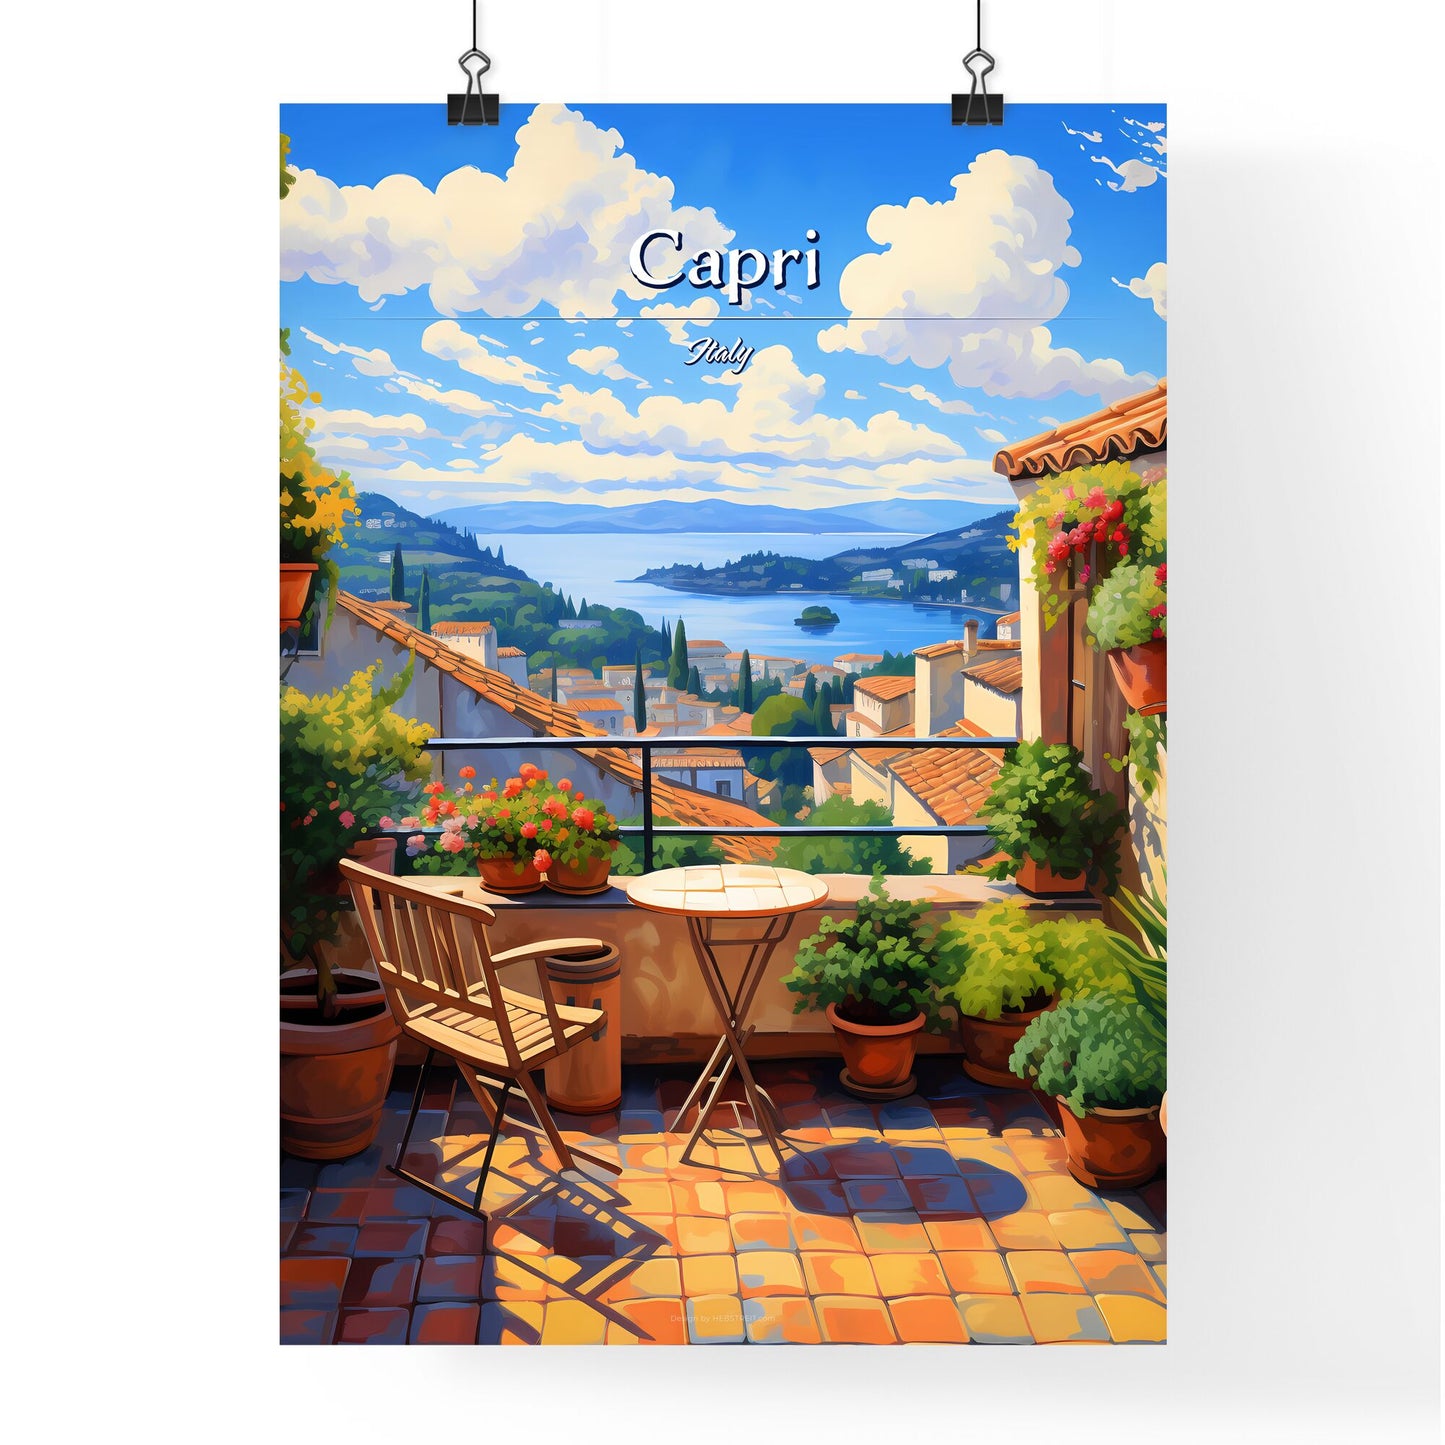 On the roofs of Capri, Italy - Art print of a church with a steeple and trees Default Title